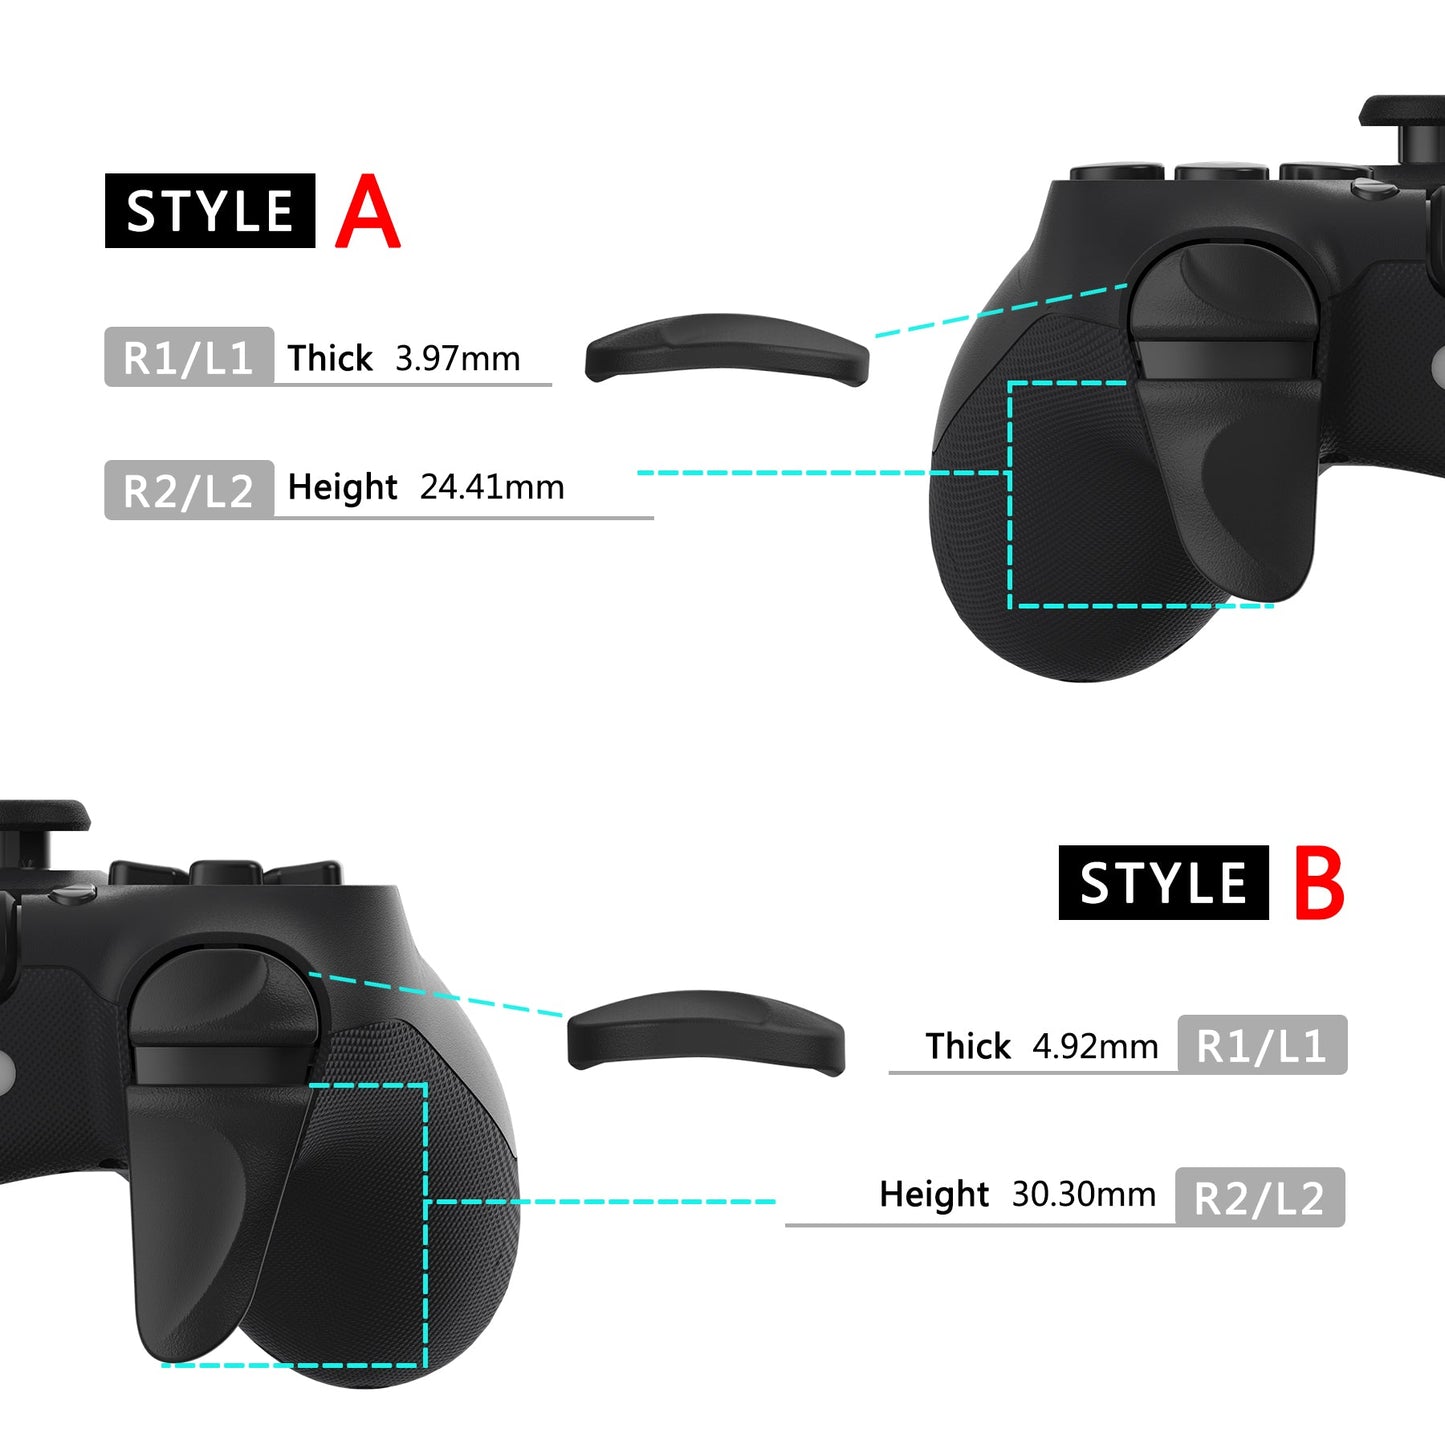 PlayVital 2 Pair Black Shoulder Buttons Extension Triggers for PS4 All Model Controller, Game Improvement Adjusters for PS4 Controller, Bumper Trigger Extenders for PS4 Slim Pro Controller - P4PJ001 PlayVital